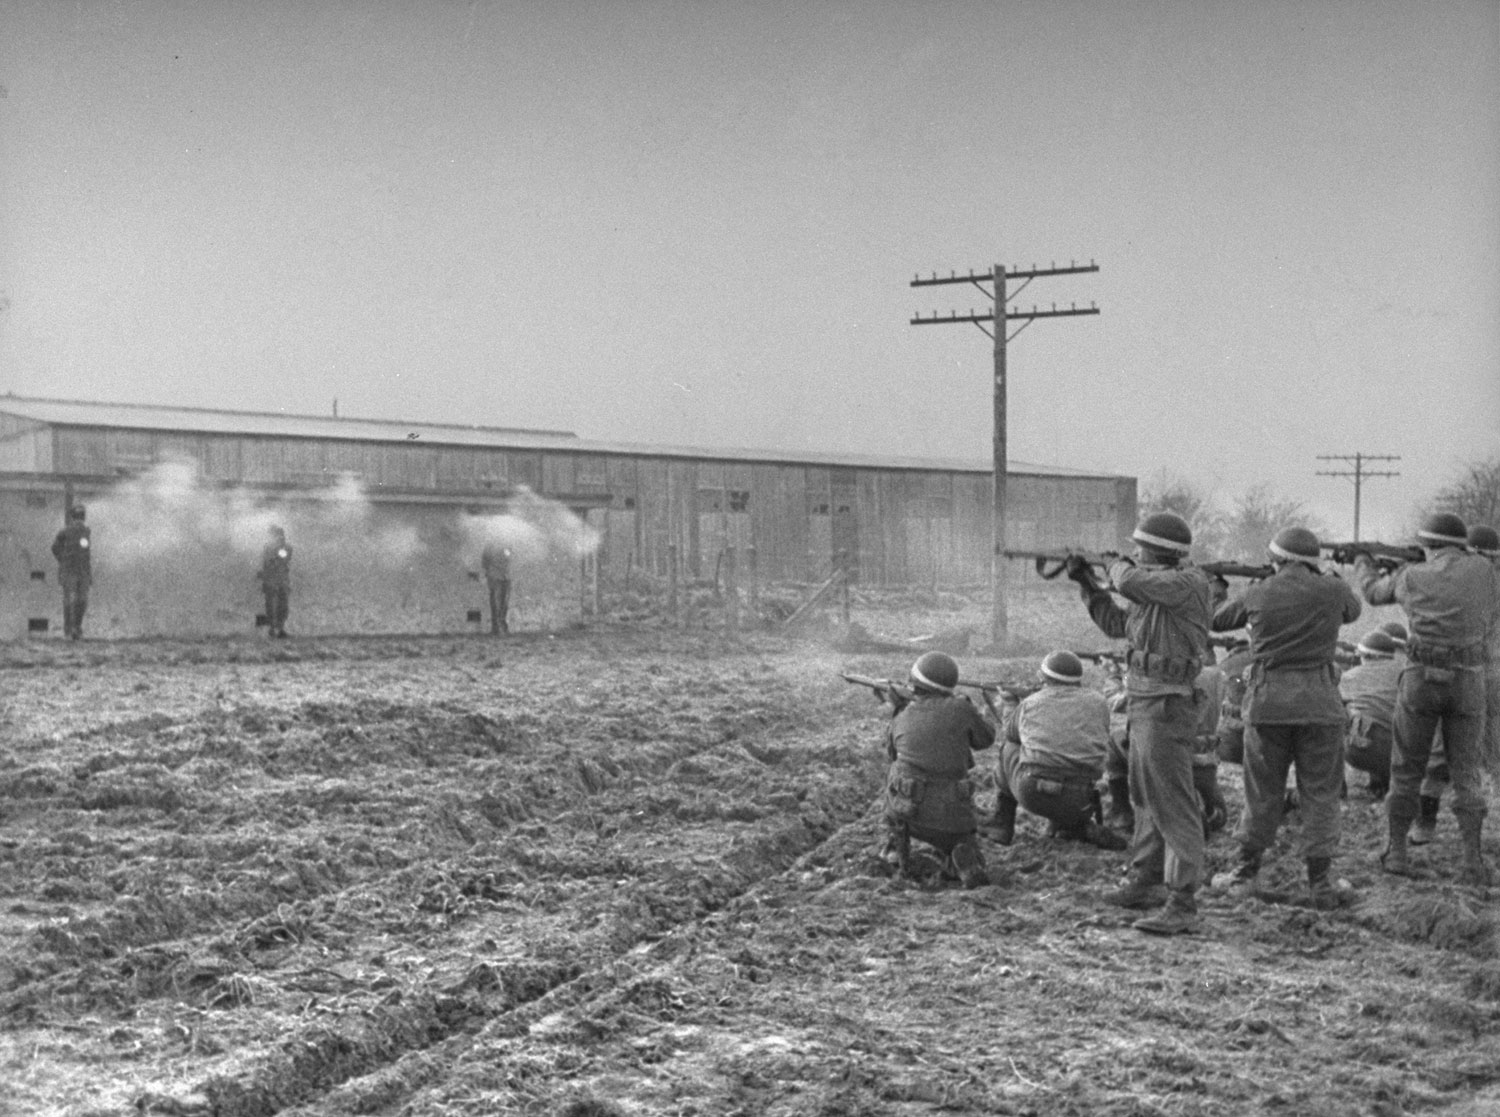 The volley is fired and three white puffs of smoke appear against the wall of the concrete block. The initial burst killed all three almost instantaneously. The firing squad, all military police, consisted of three groups of eight men, each with one additional marksman along as a spare.